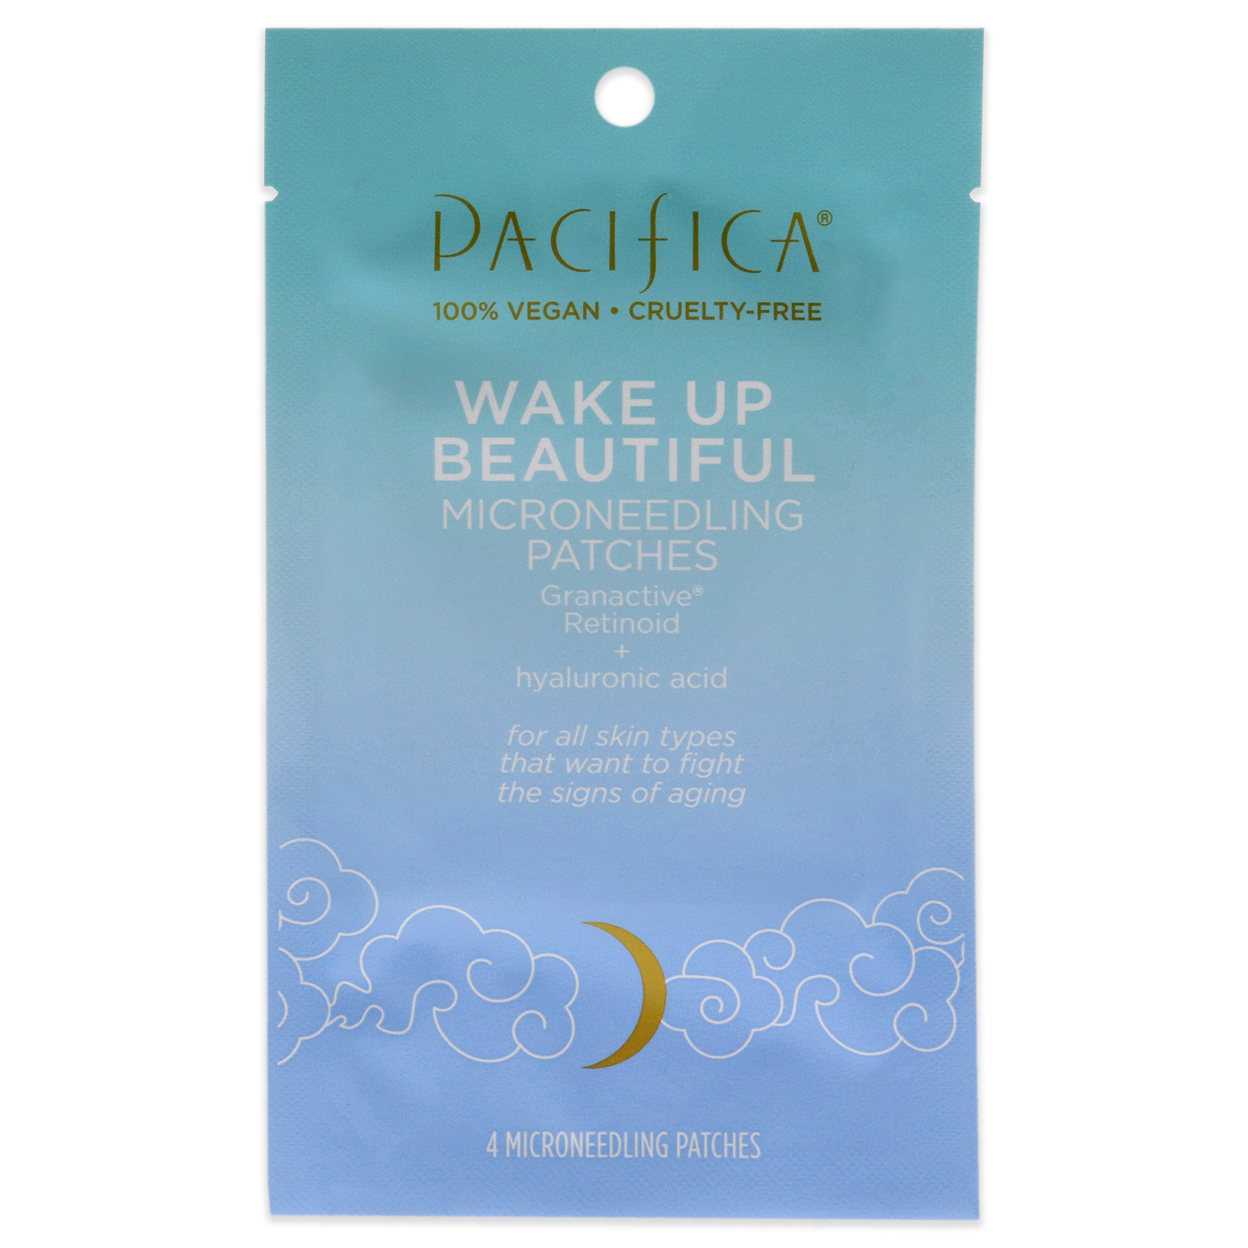 Pacifica Wake Up Beautiful Microneedling Patches 4 Pc